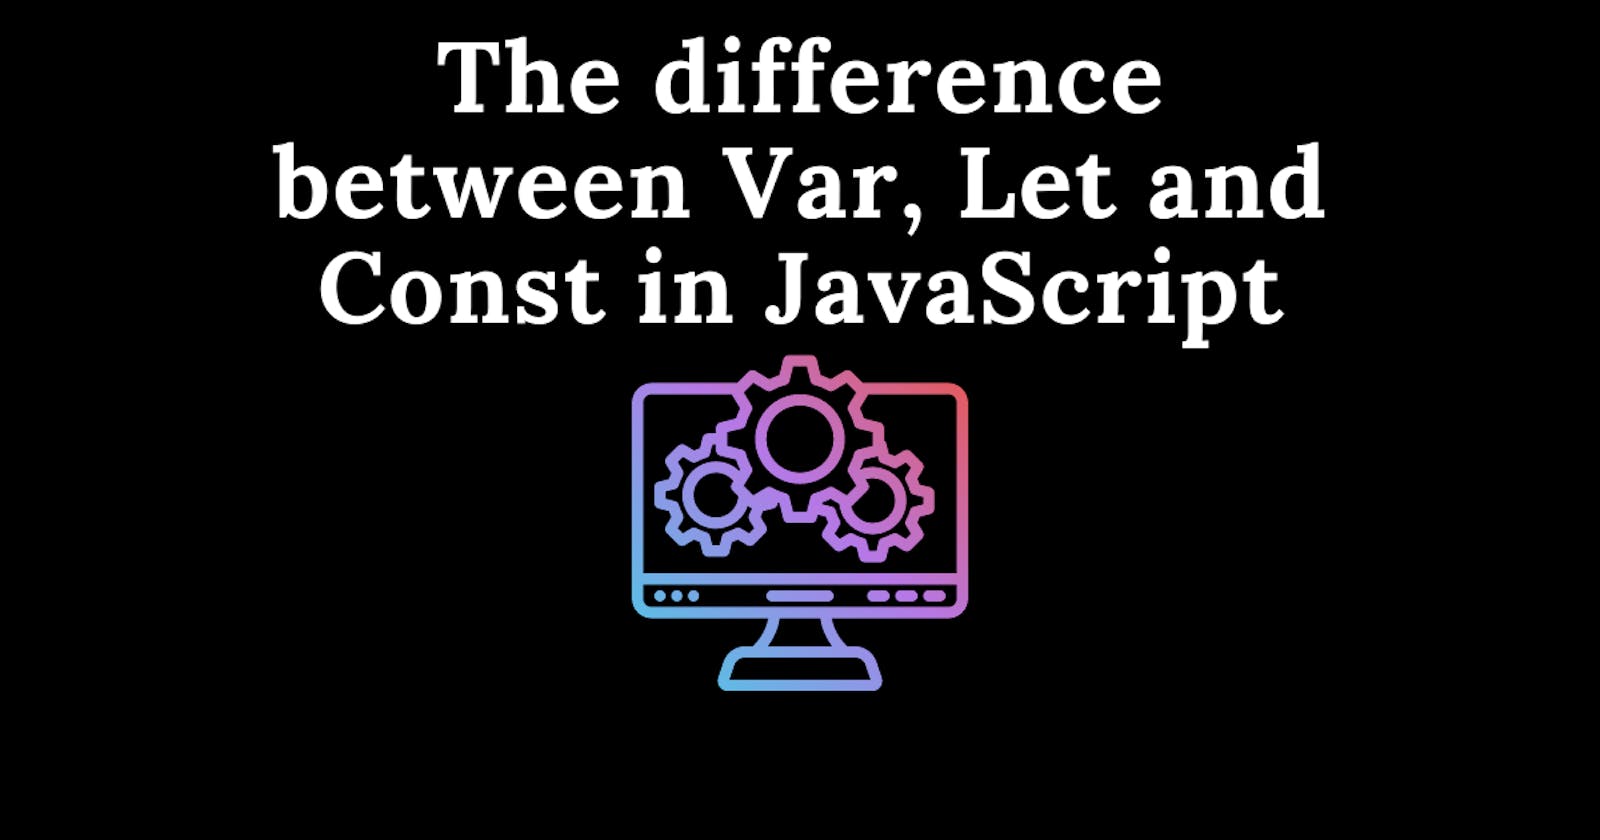 The difference between Var, Let and Const in JavaScript